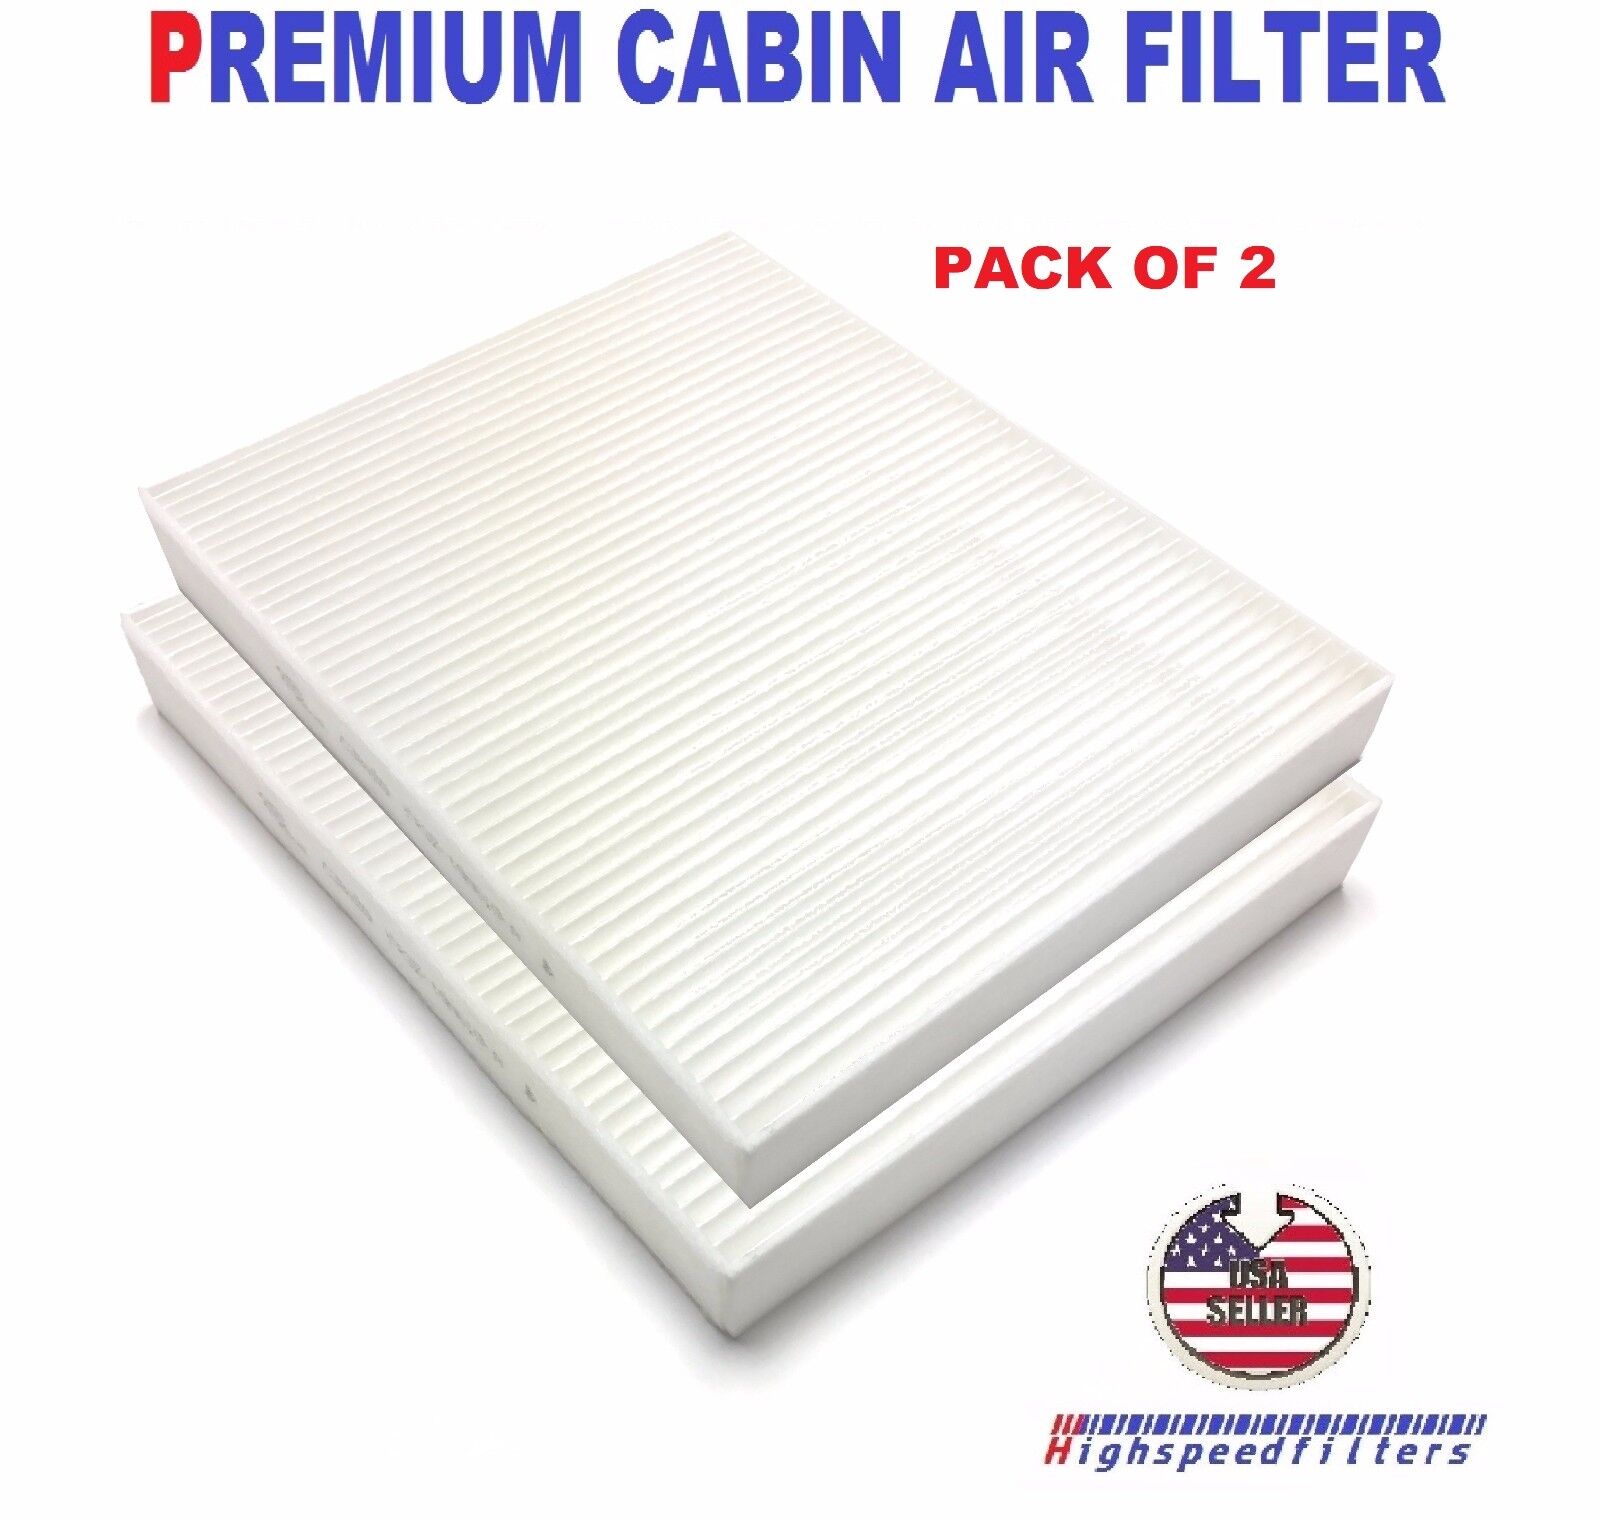 PACK OF 2 C26176 CABIN AIR FILTER FOR 2011 - 2021 CHALLENGER CHARGER 300 